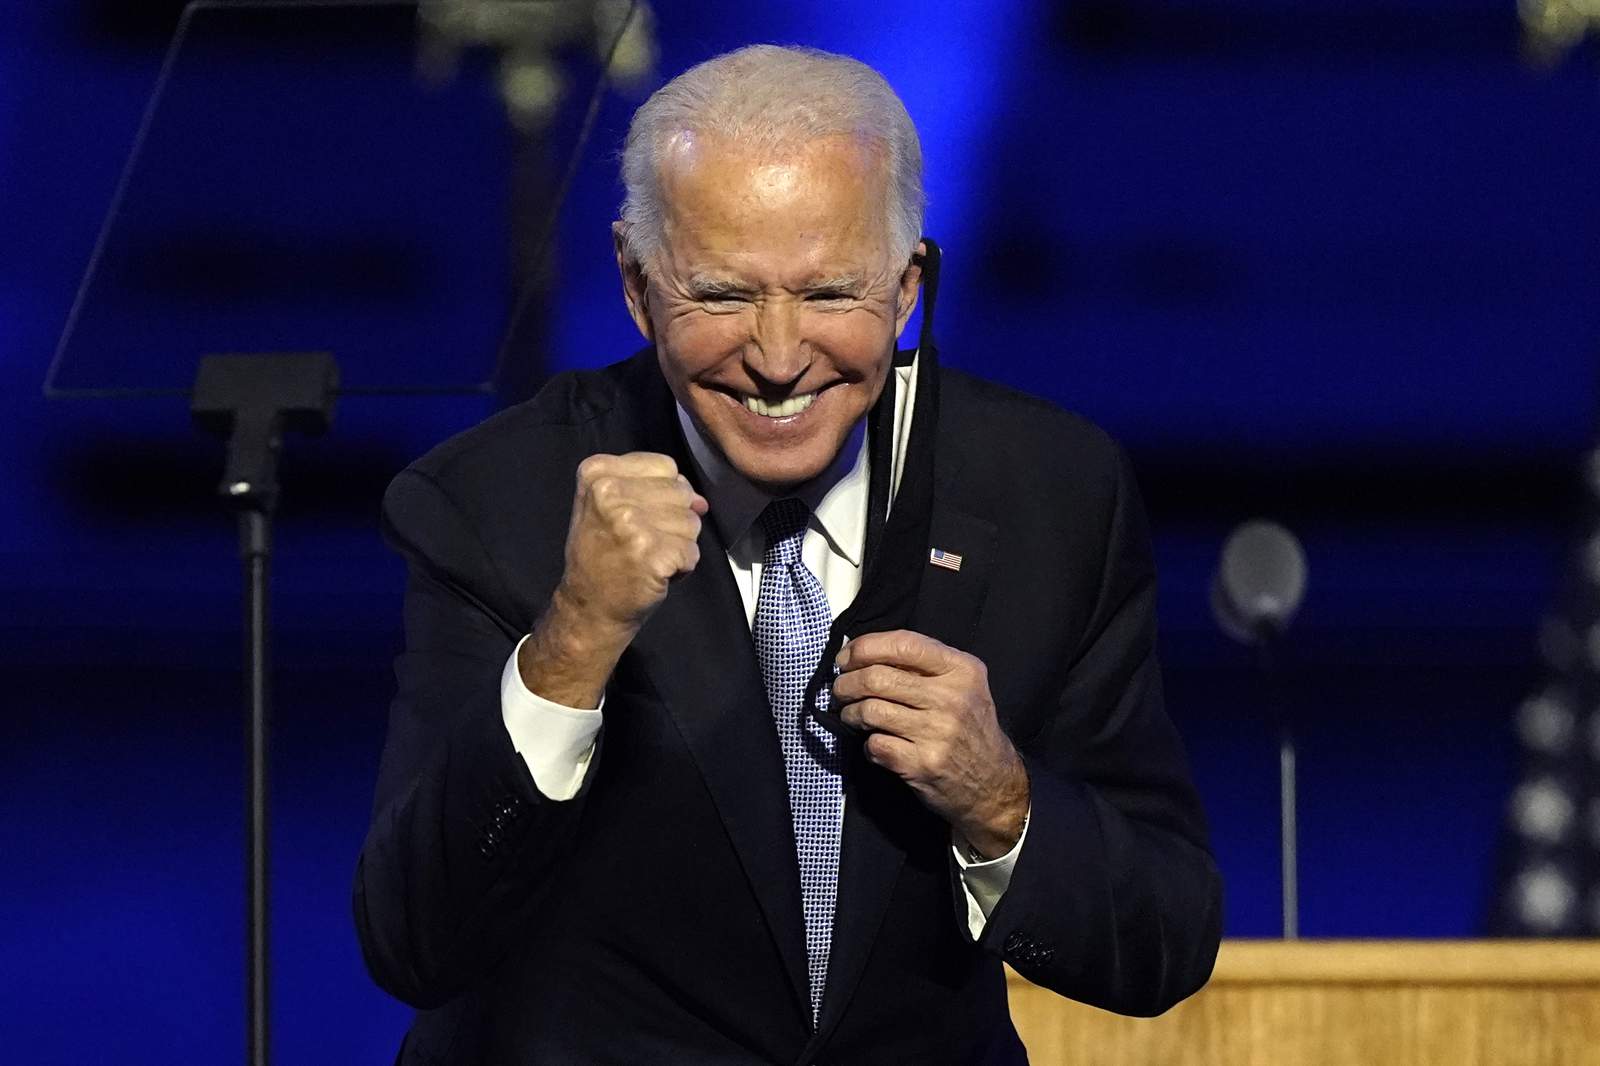 CNN tops cable ratings for election week, Biden's speech